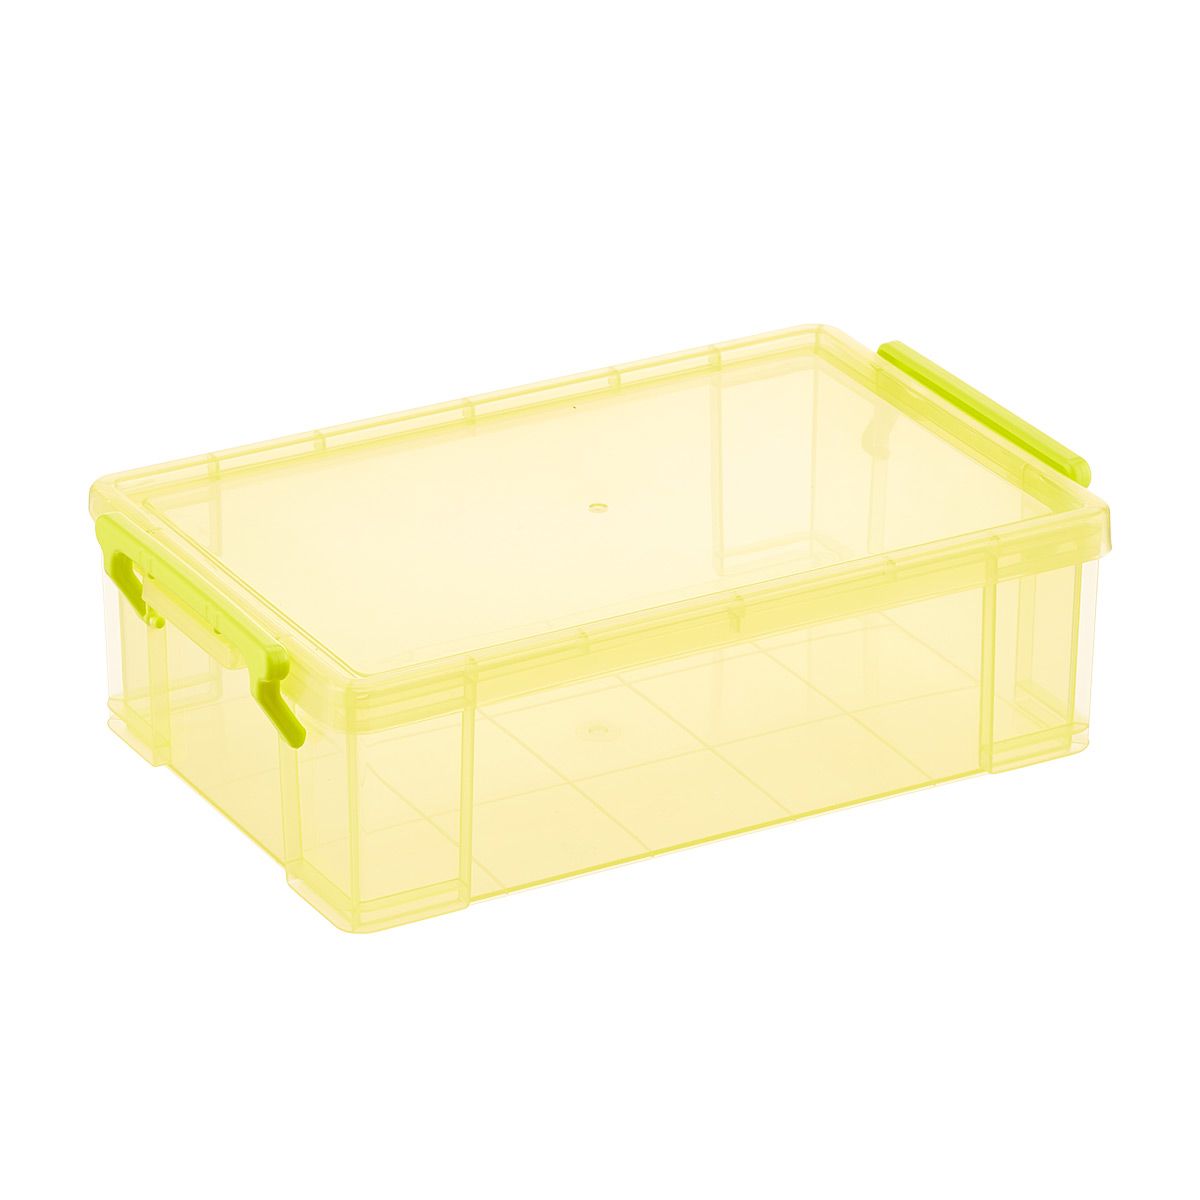 Large Storage Latch Box Yellow | The Container Store